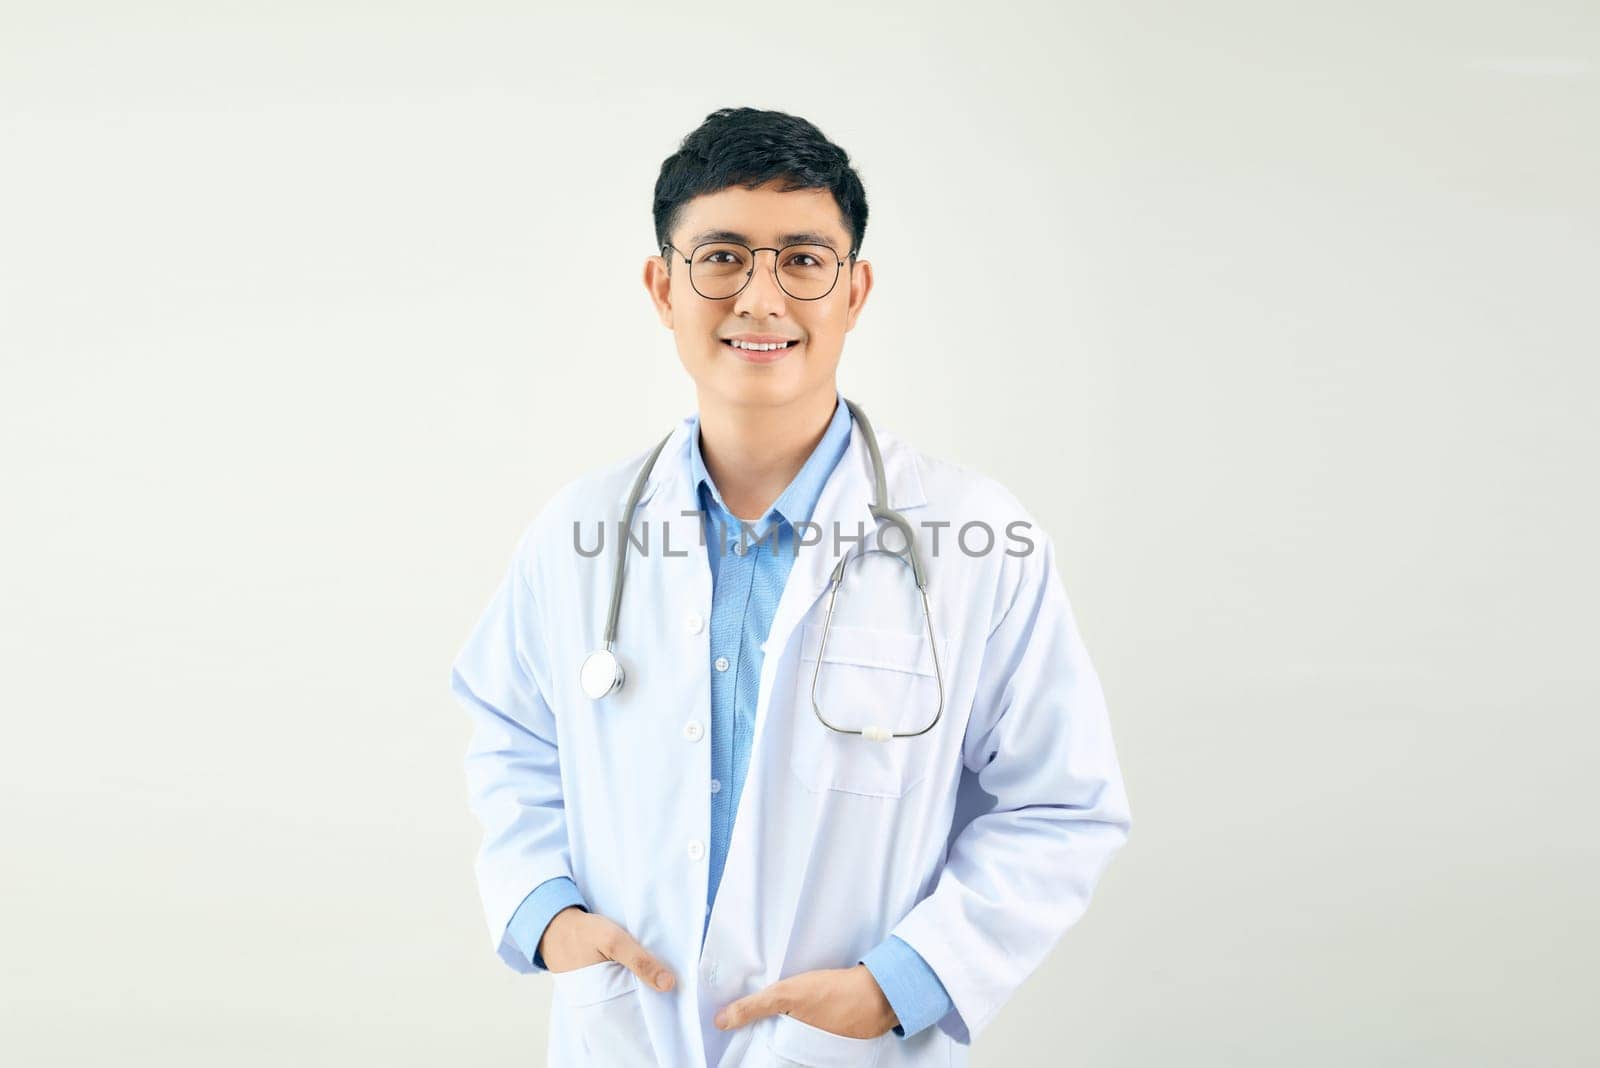 Portrait of male confident doctor over white background studio, healthcare and Medical technology concept.